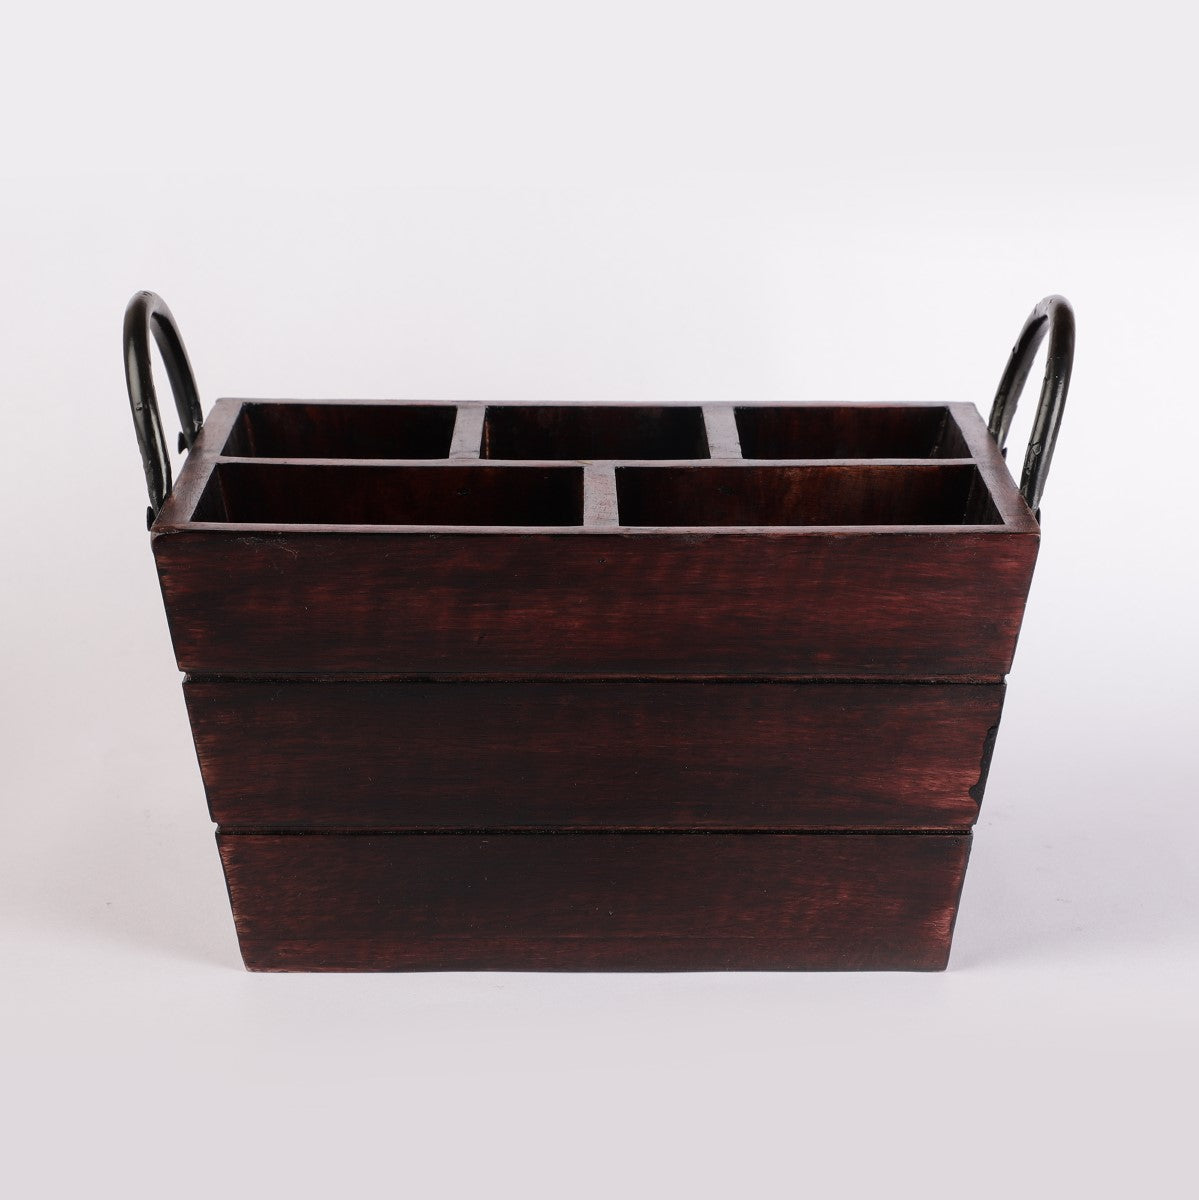 Wooden Finished Cutlery Caddy (5-Sections)